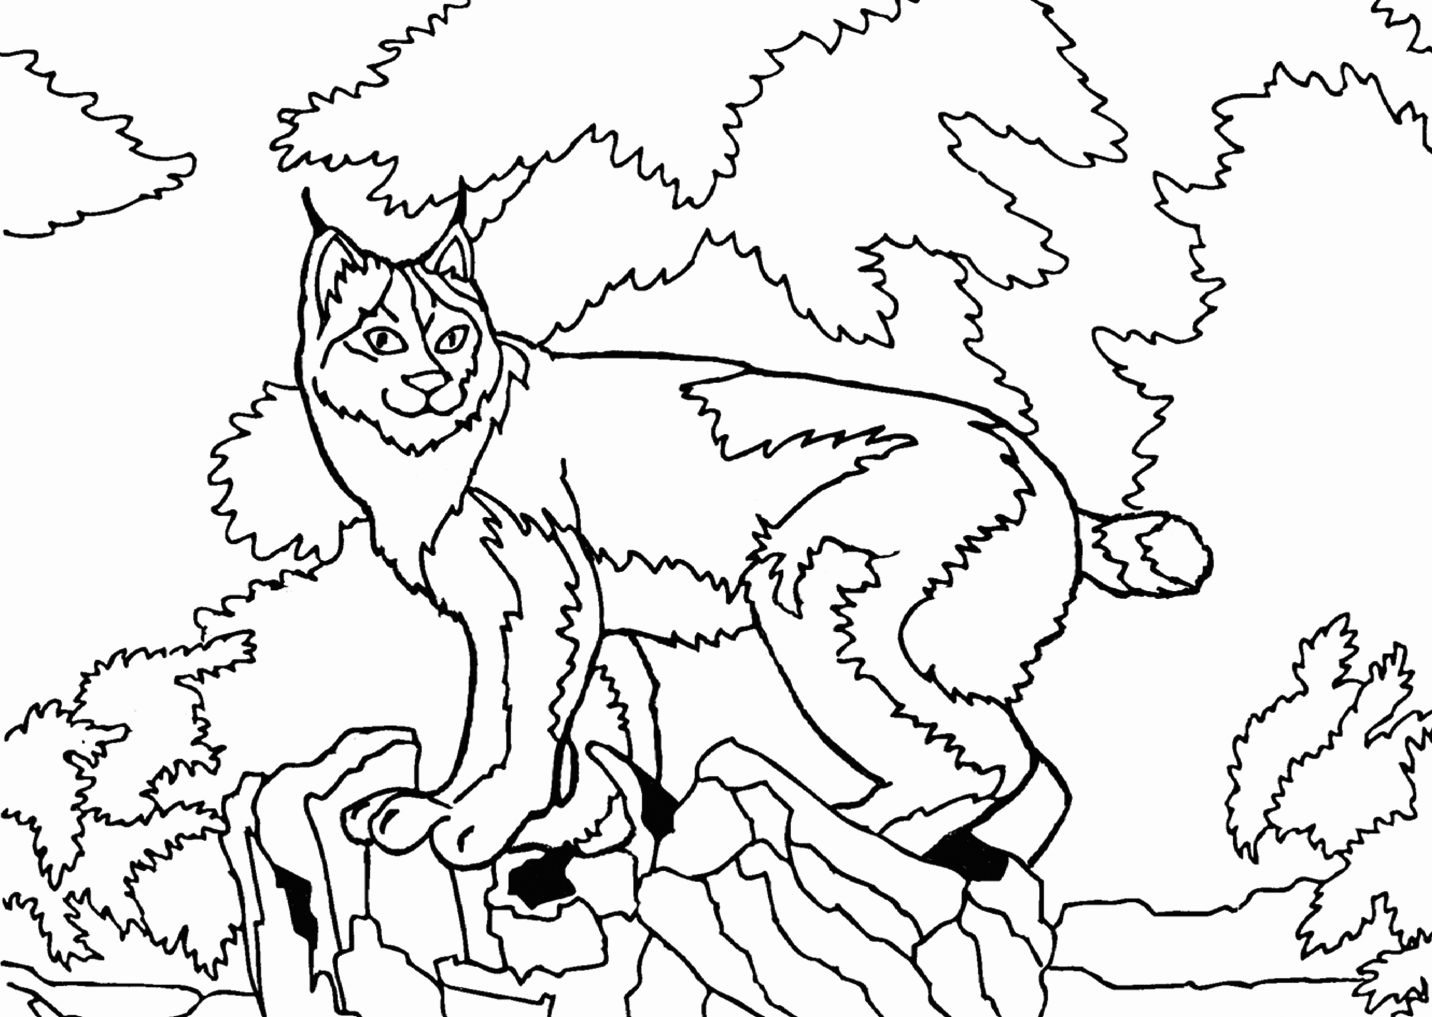 Lynx Cat Scene Coloring Pages